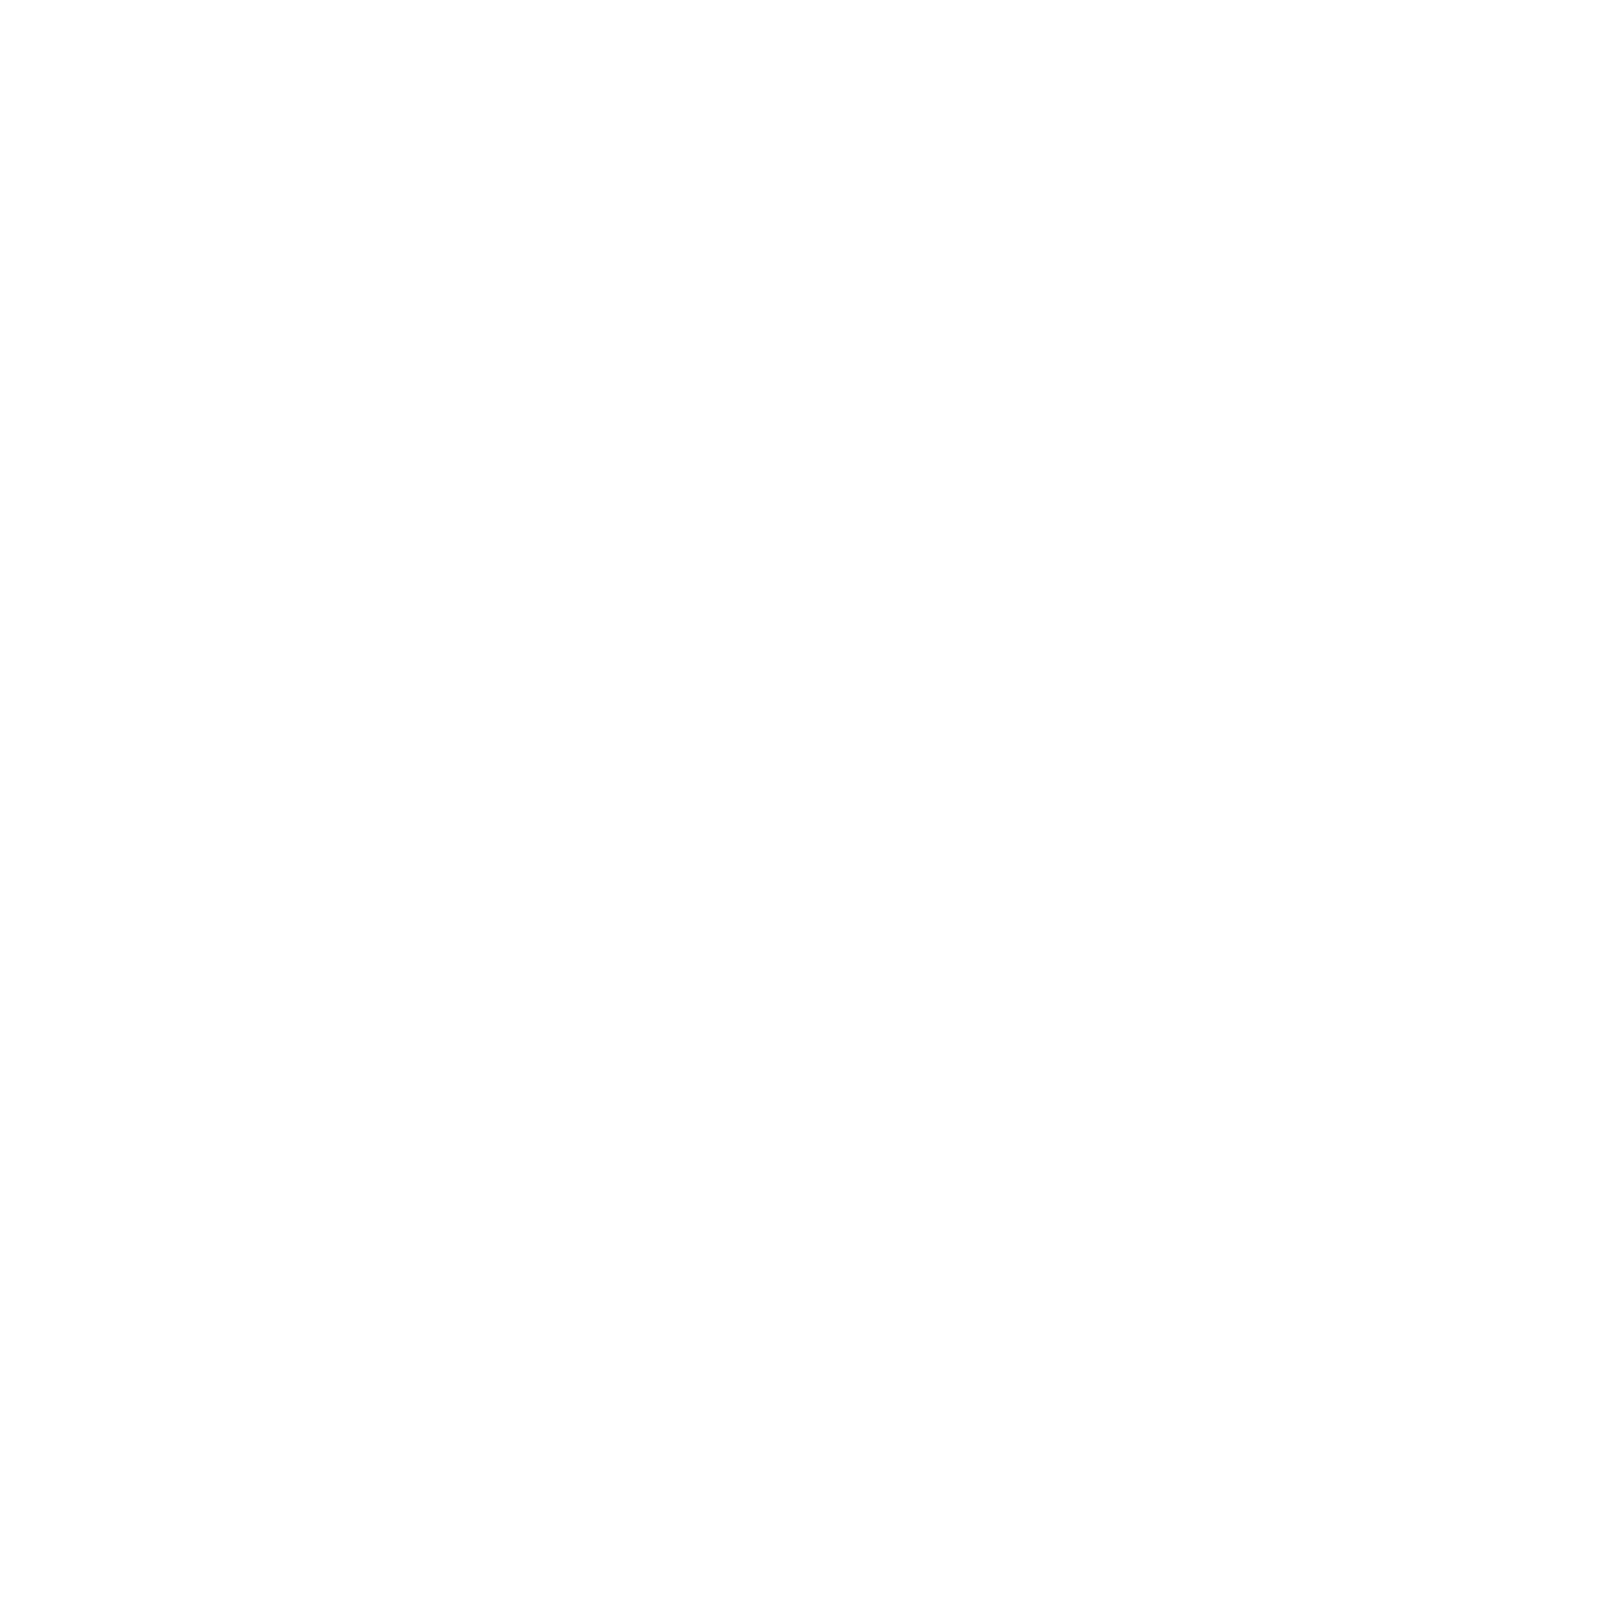 THE ROWXFORD - THINK OXFORD ONLY WAY BE